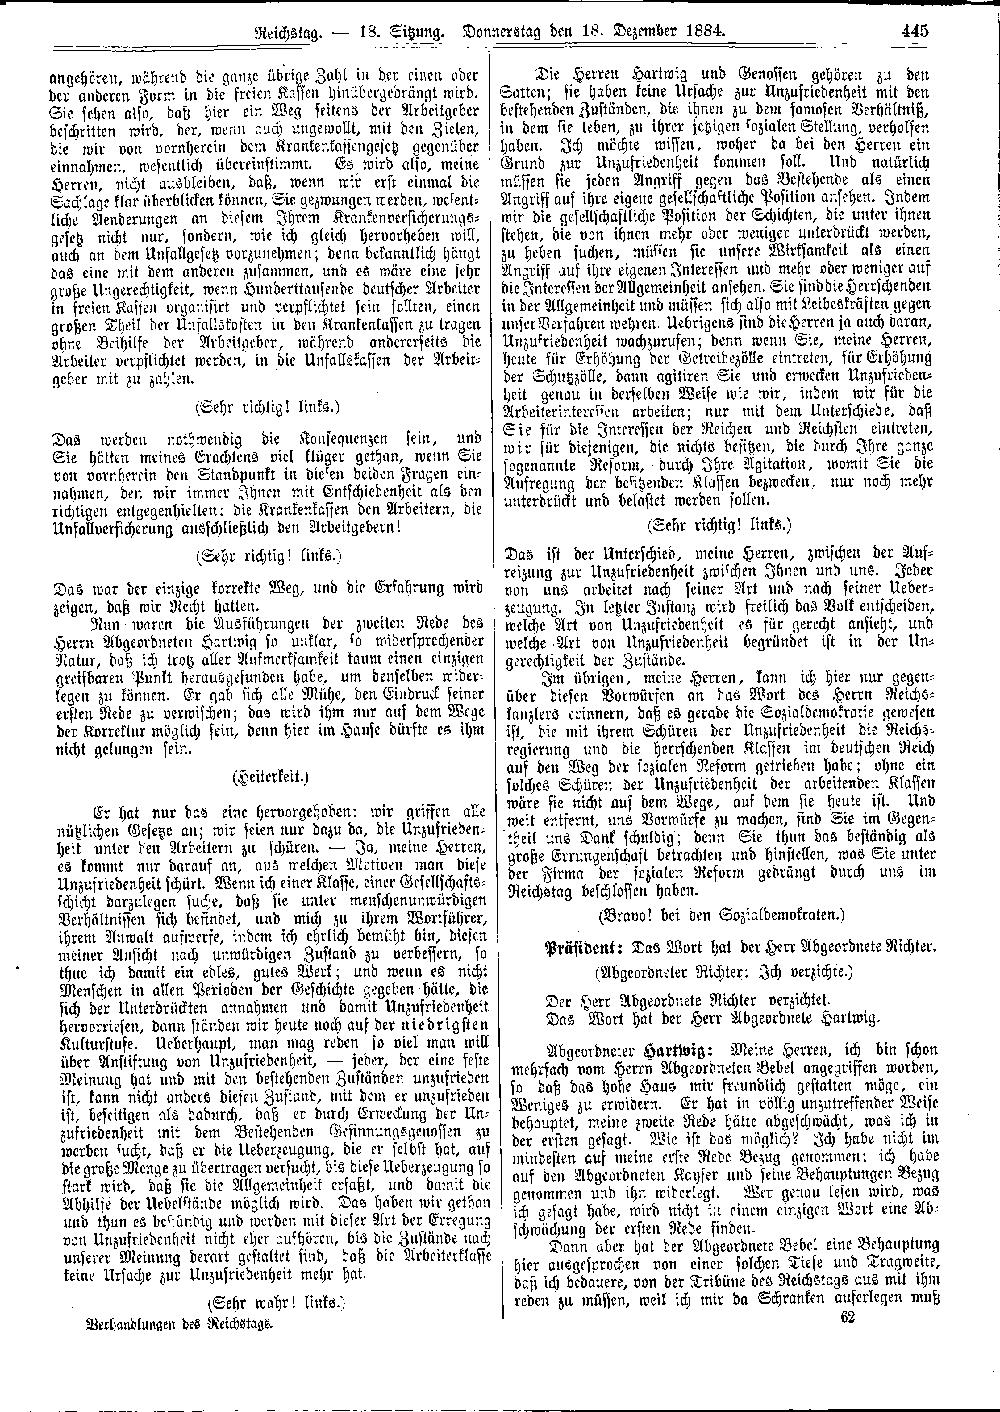 Scan of page 445